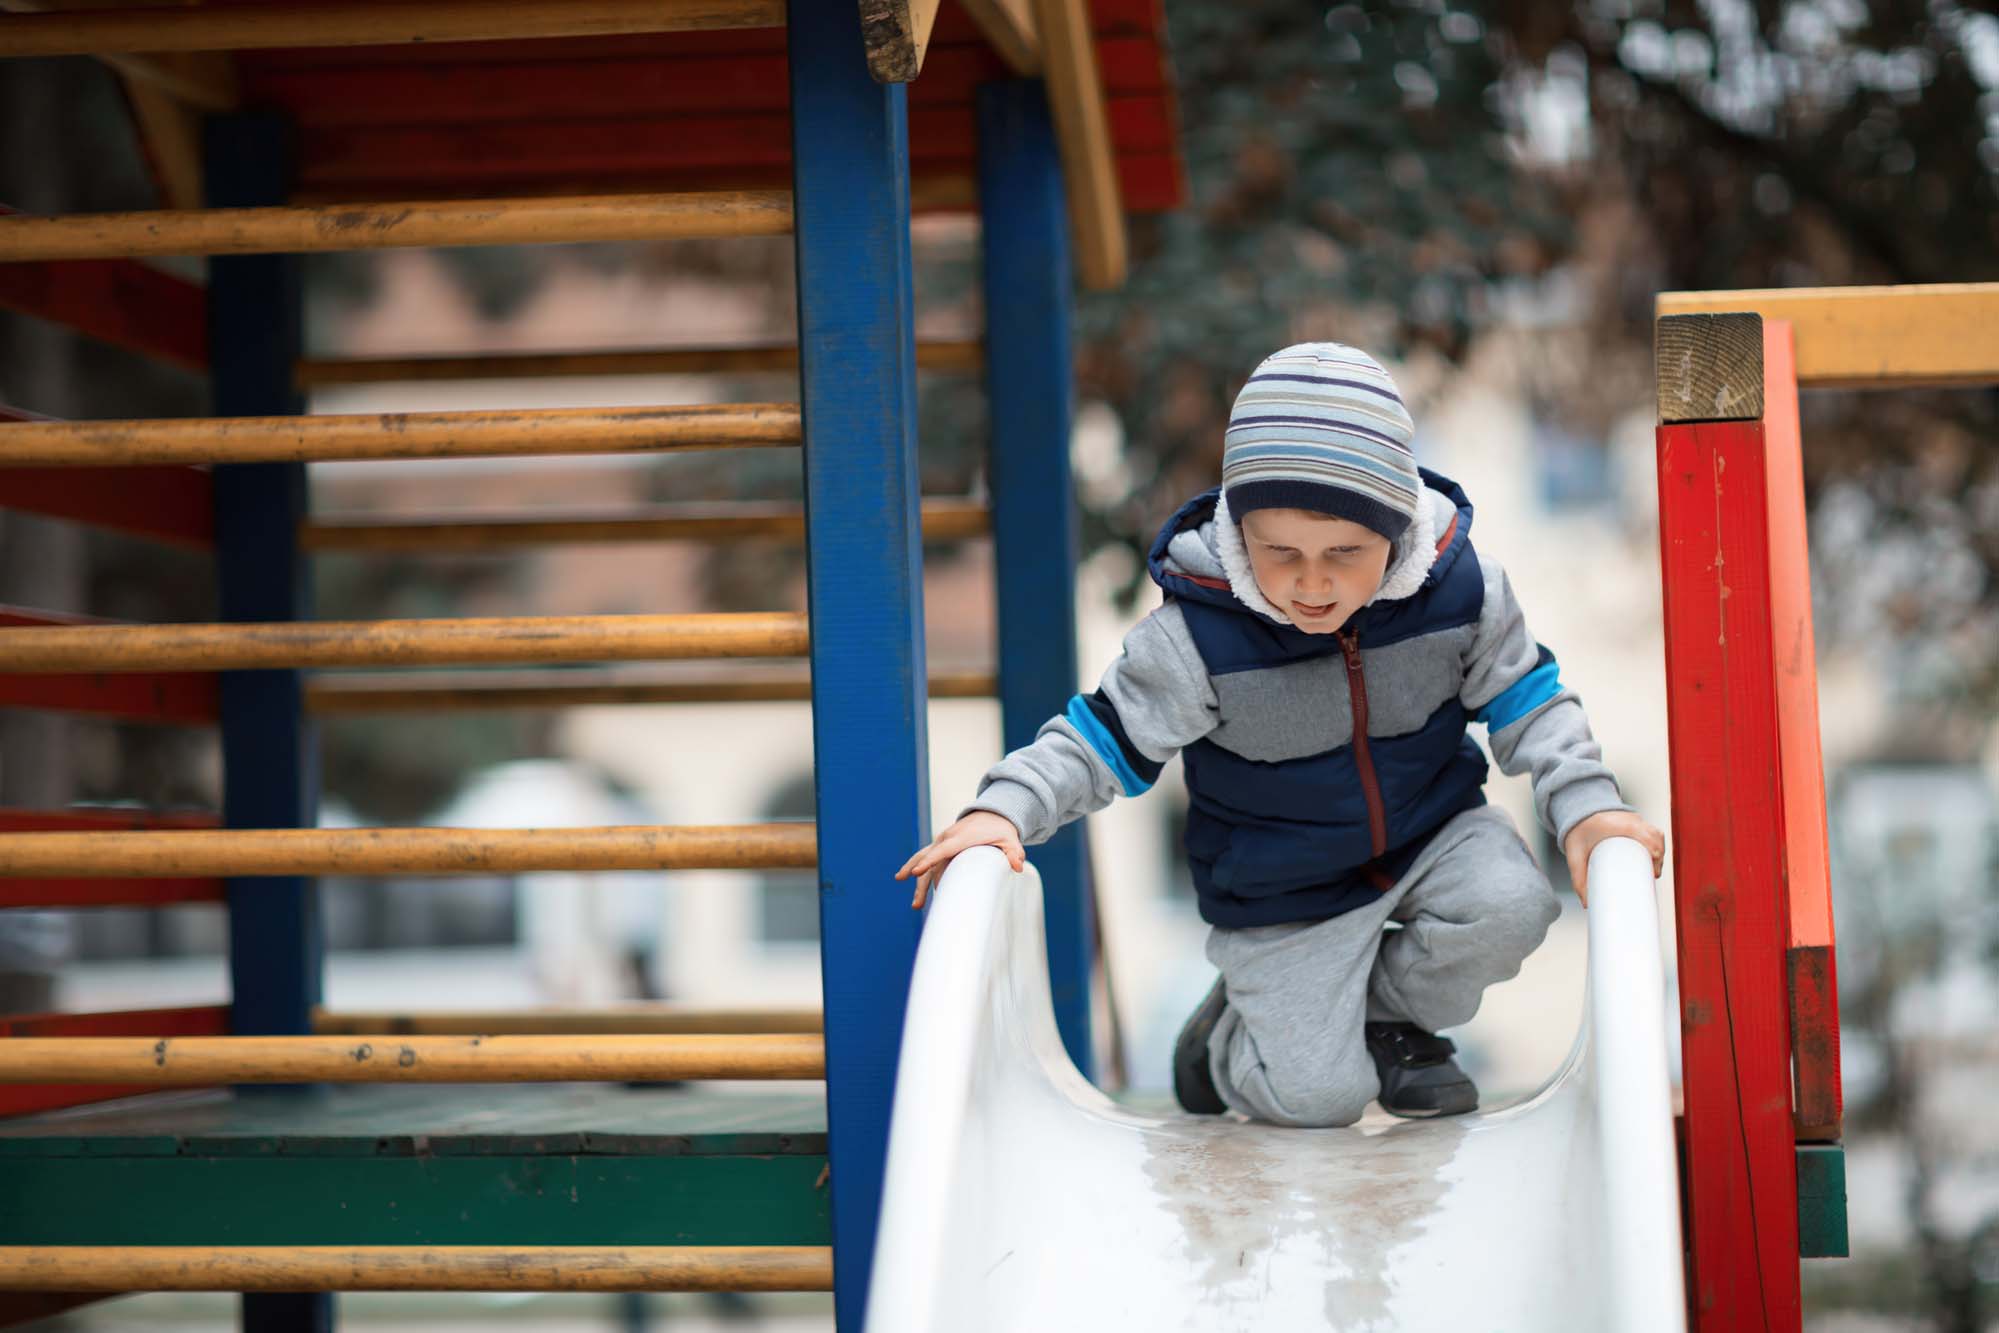 It’s actually really dangerous to go down a slide with your kid